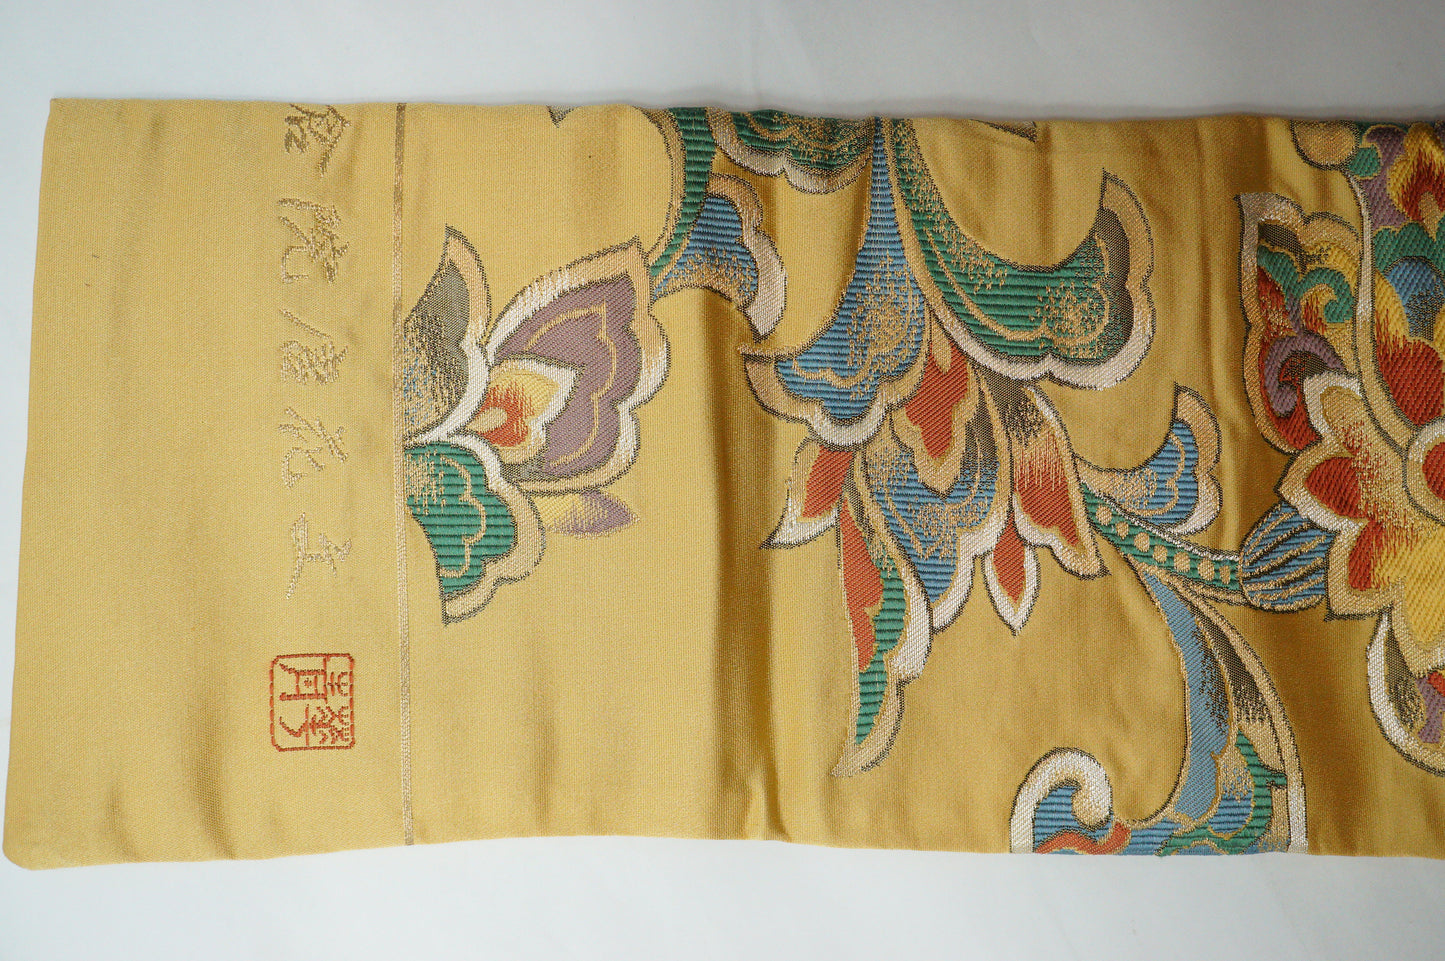 Japanese Vintage Weapon Bag made of Kimono Fabric from Japan 0110E2